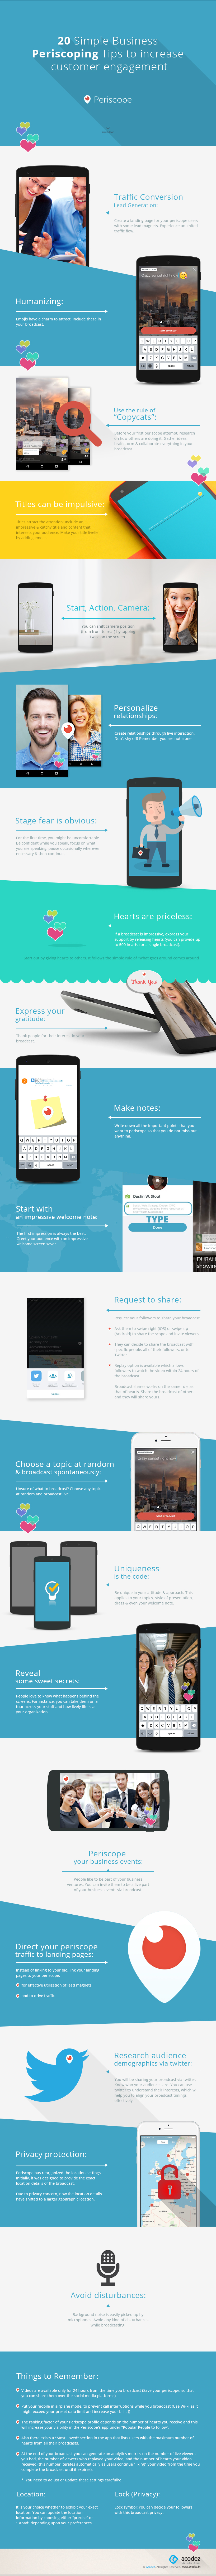 Infographic: 20 Simple Business Periscoping Tips to increase customer engagement